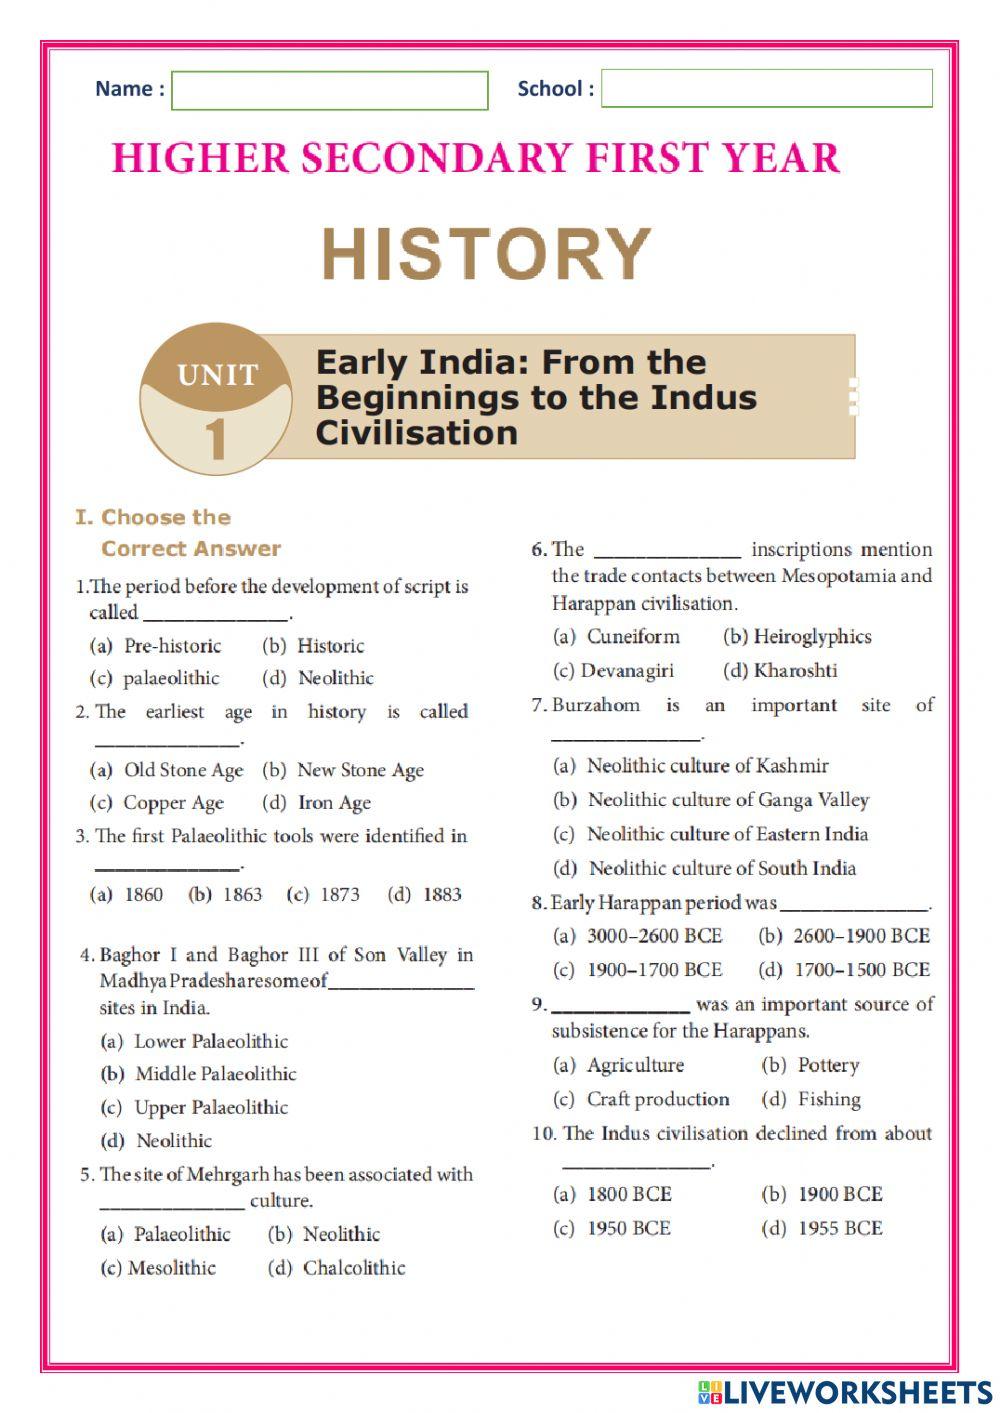 Early India: From the Beginnings to the Indus Civilisation